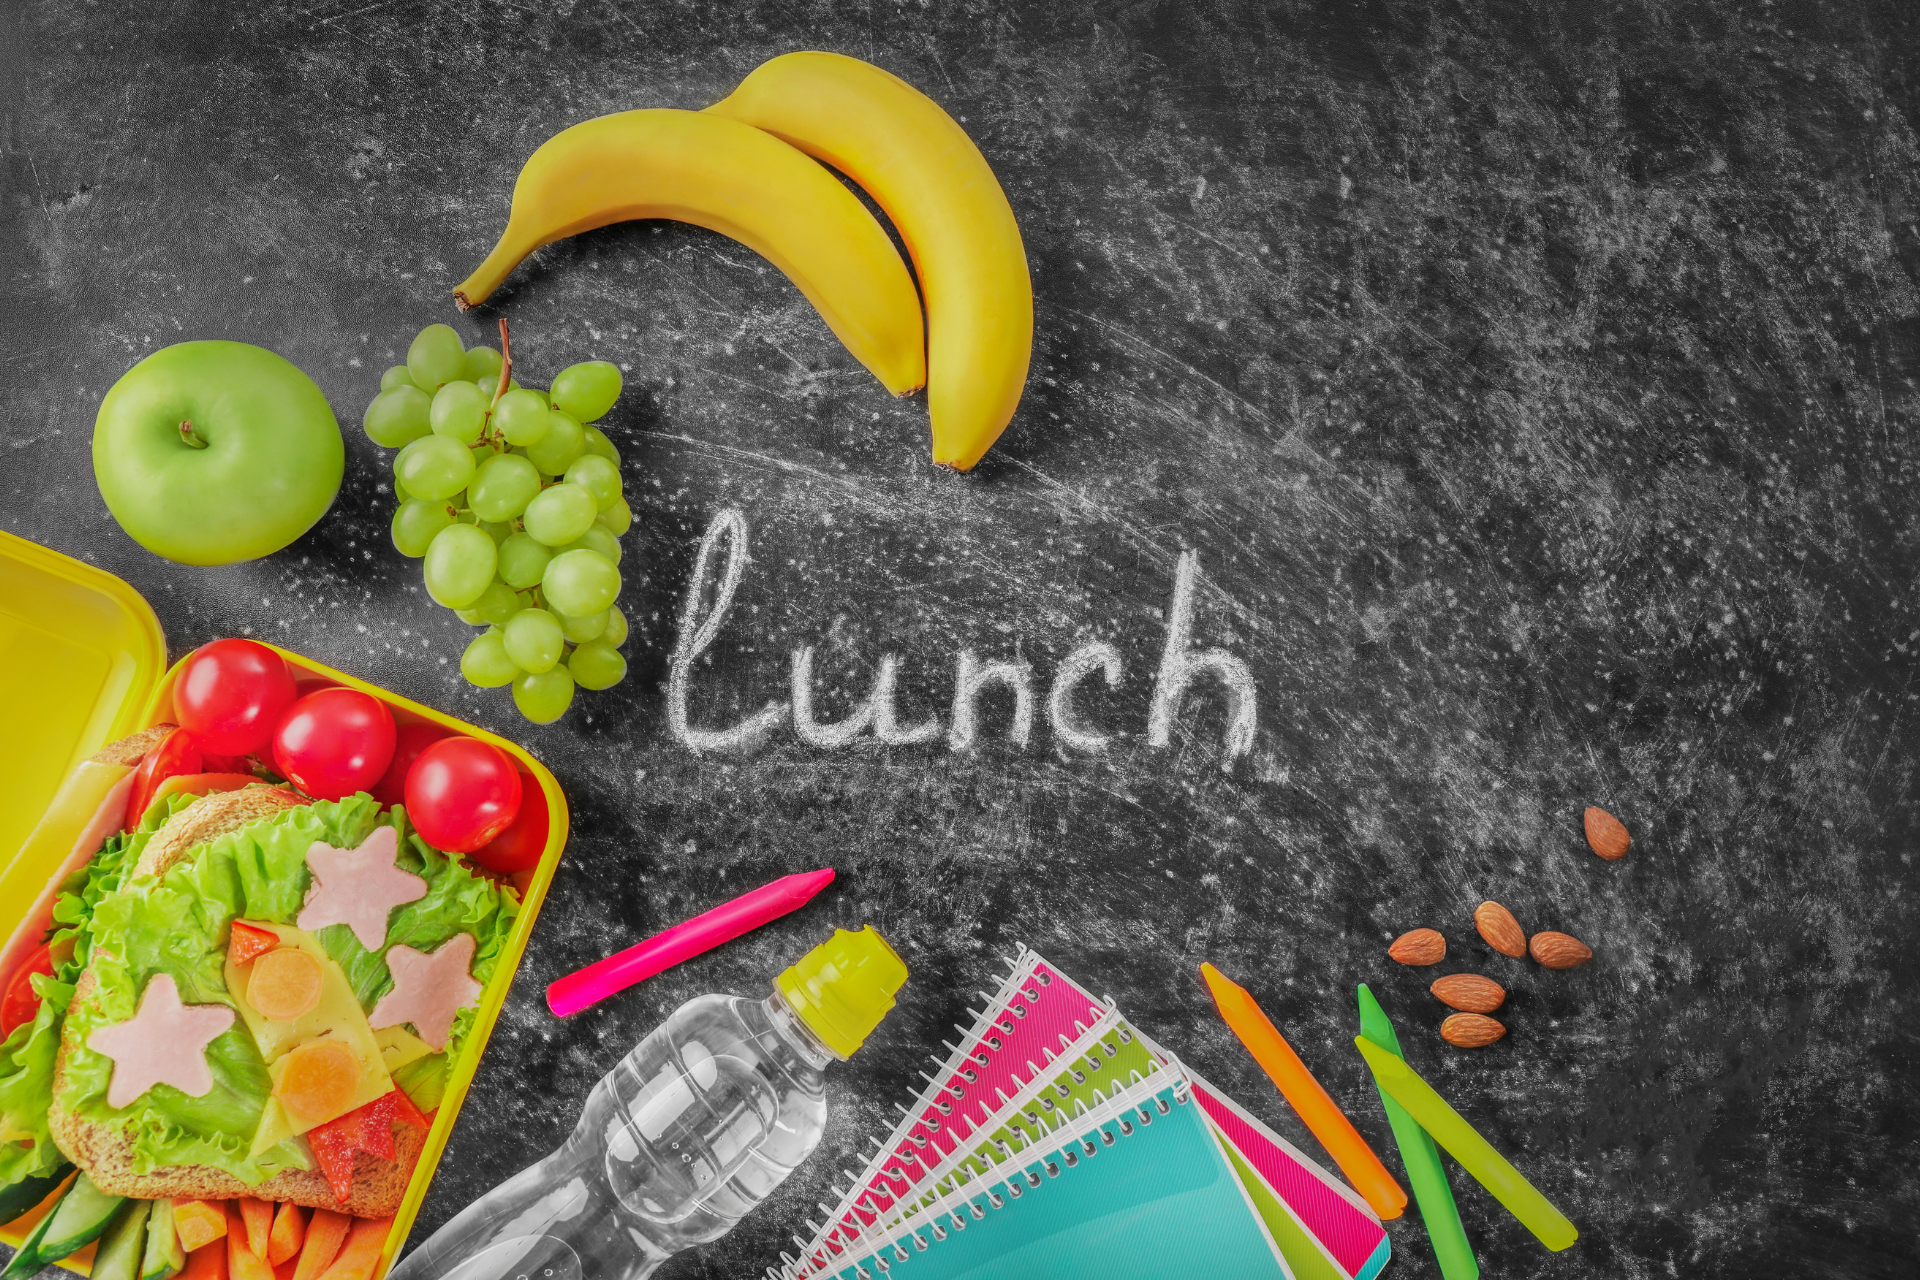 The word lunch is written on a blackboard next to a lunch box filled with fruits and vegetables.